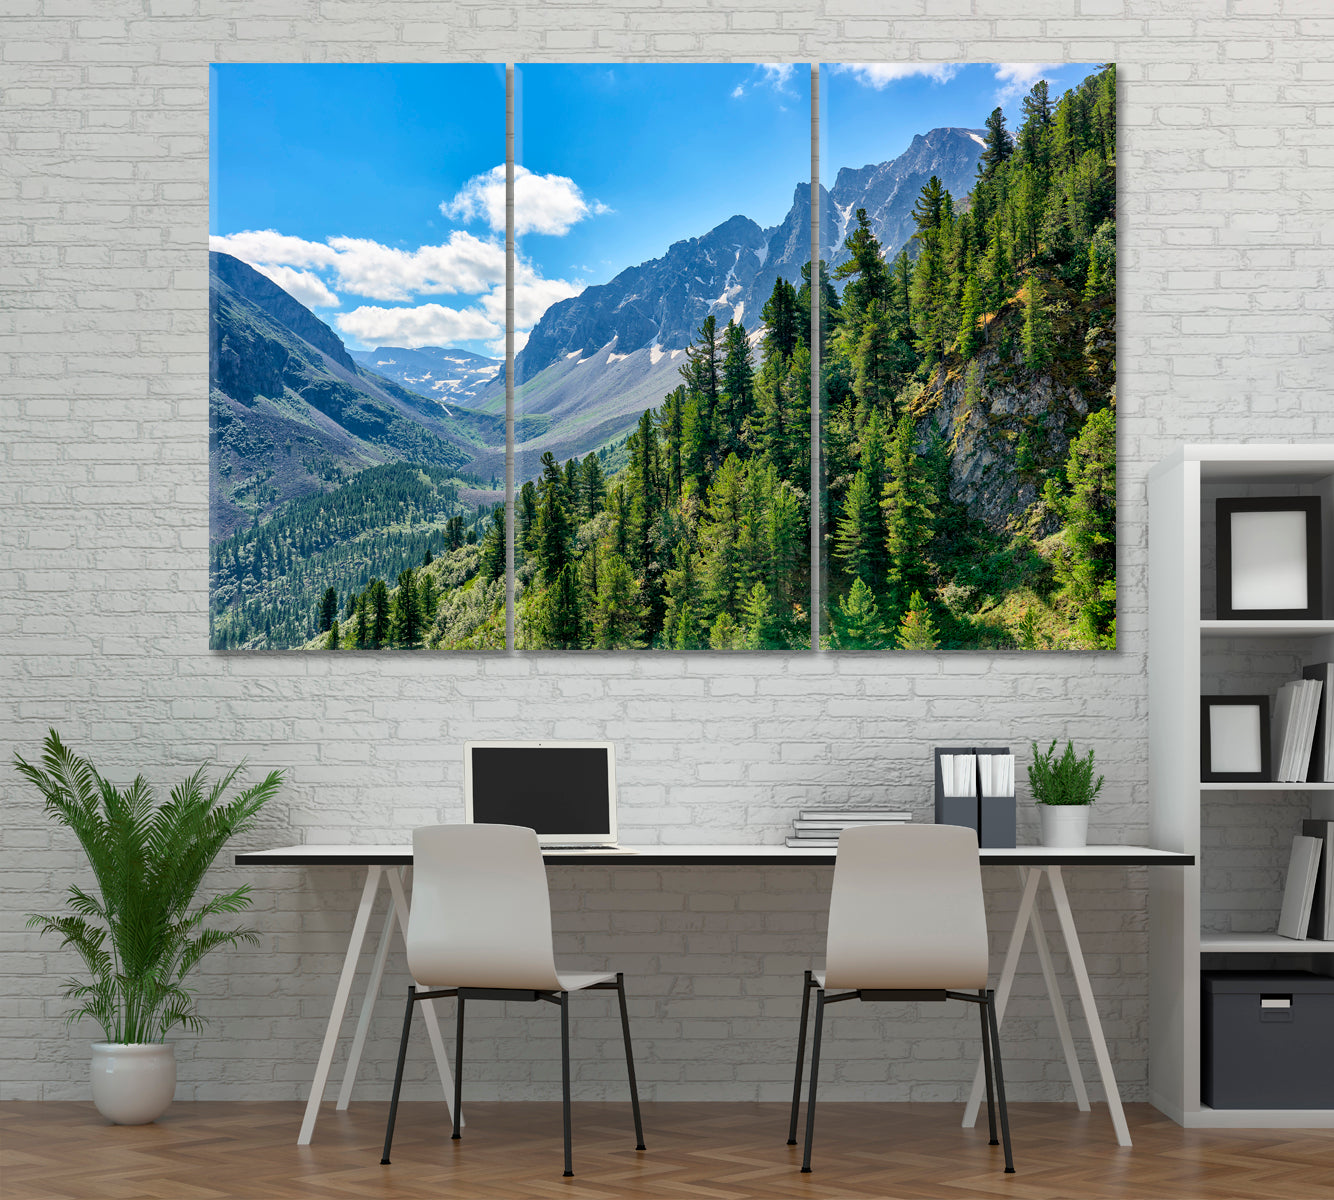 Pine Forest on Mountainside Canvas Print ArtLexy 3 Panels 36"x24" inches 